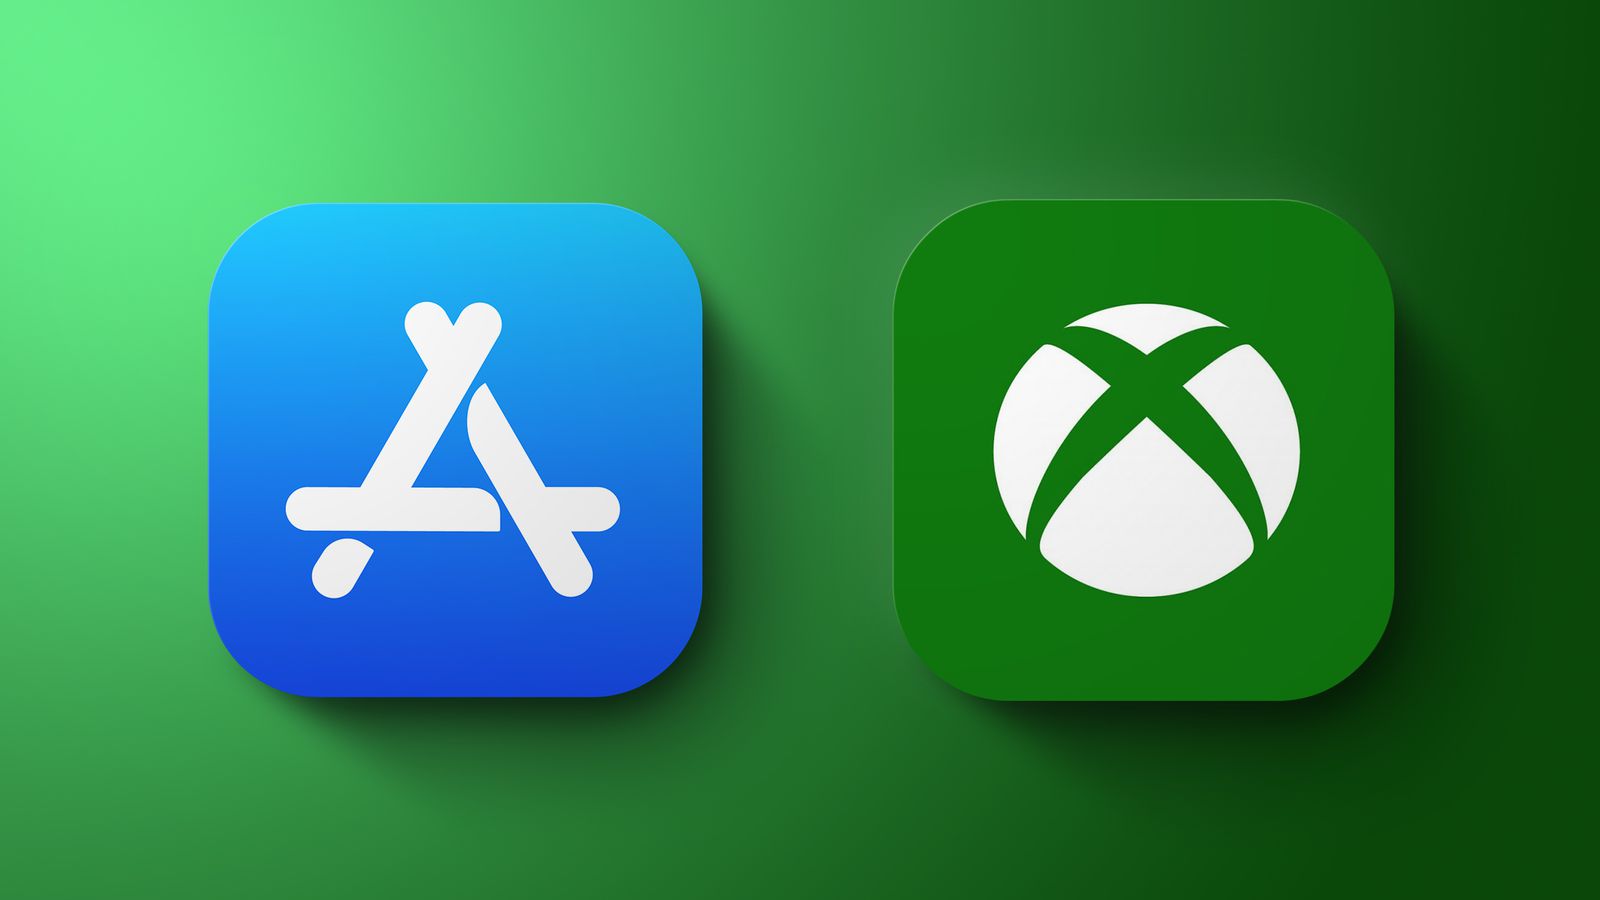 Xbox Cloud Gaming (xCloud) on iOS review: How well does it stream